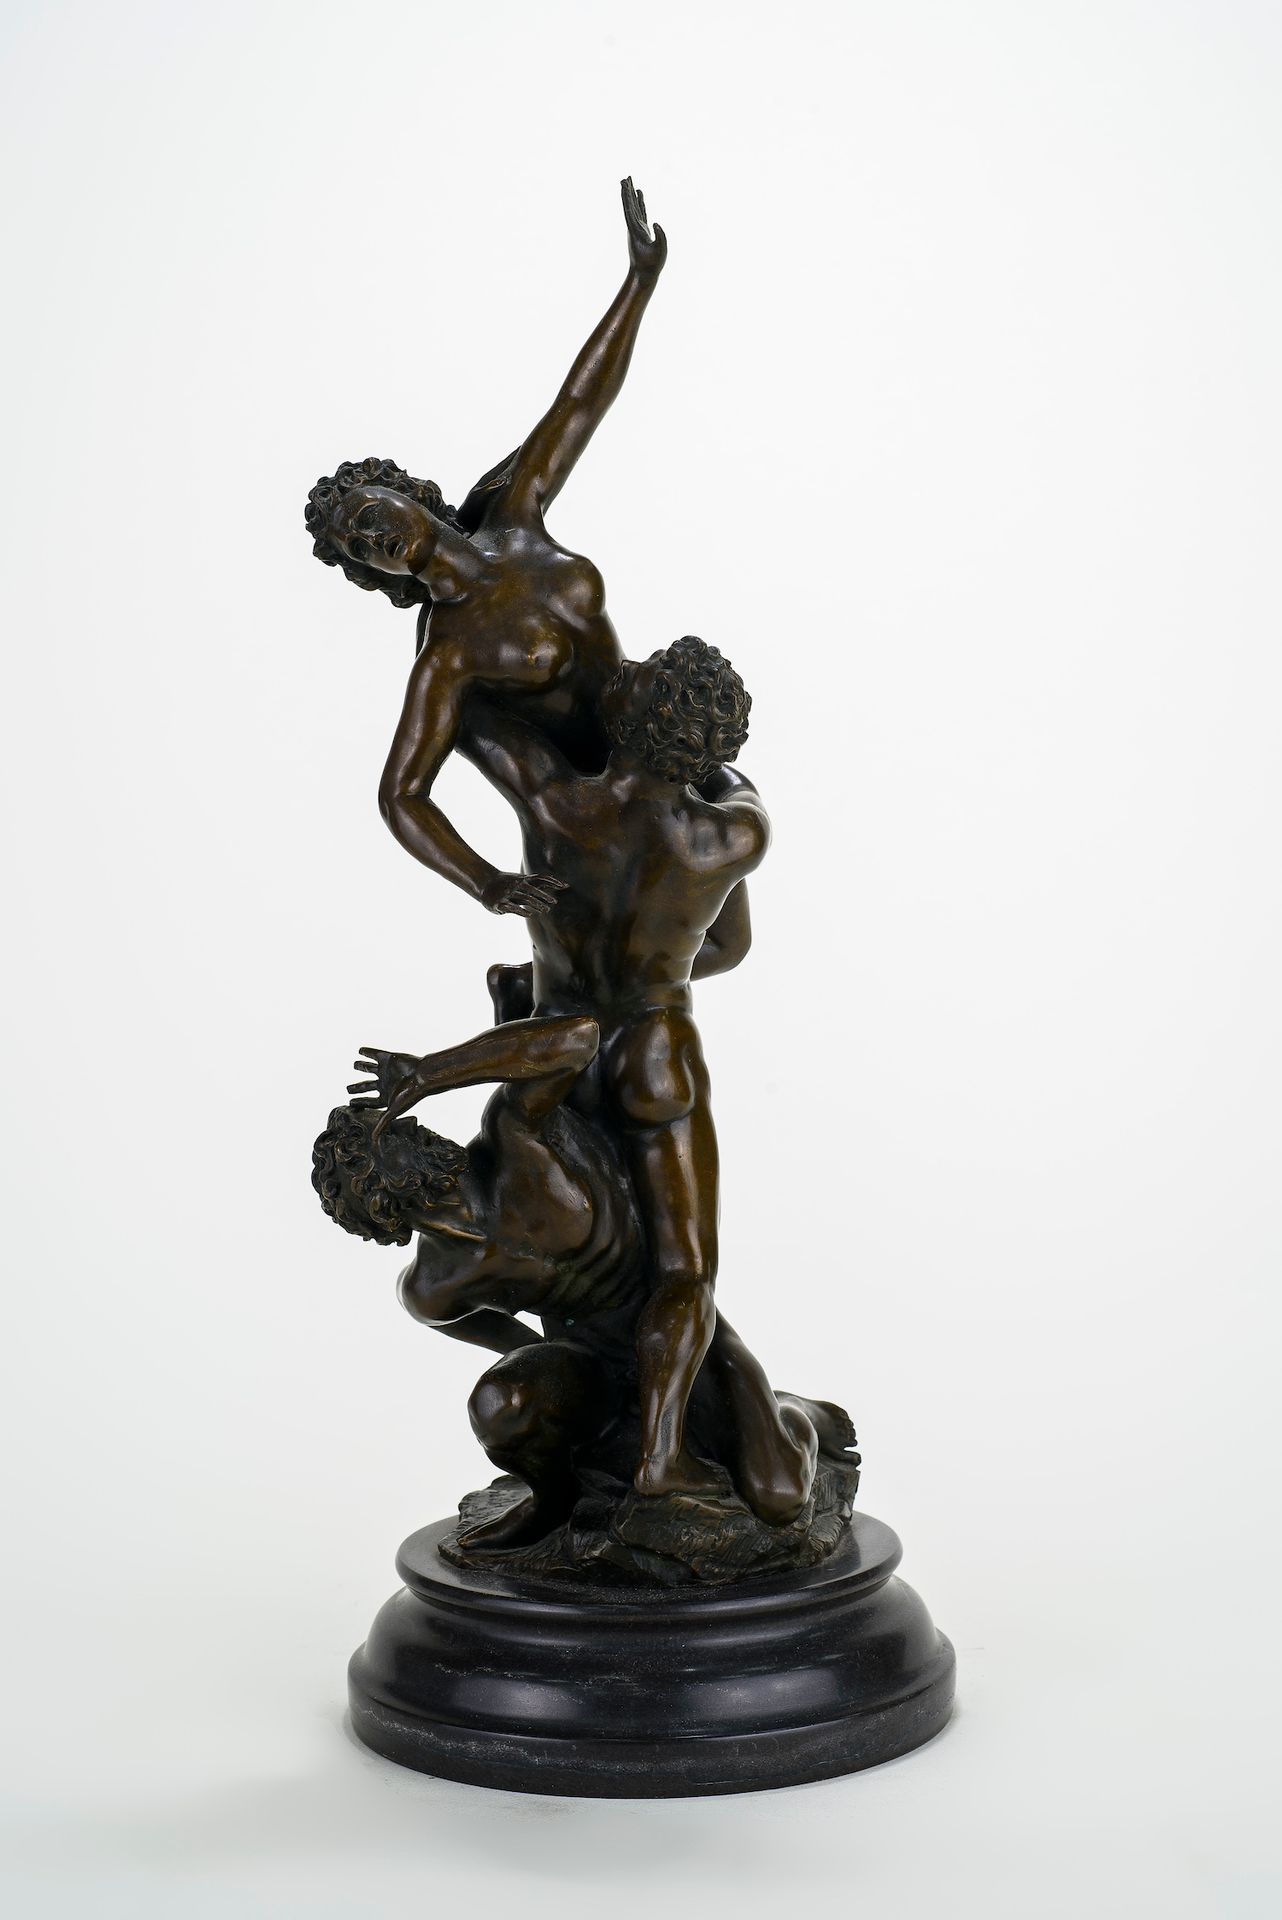 Null After John of Bologna known as Giambologna (1529-1608), circa 1880

Abducti&hellip;